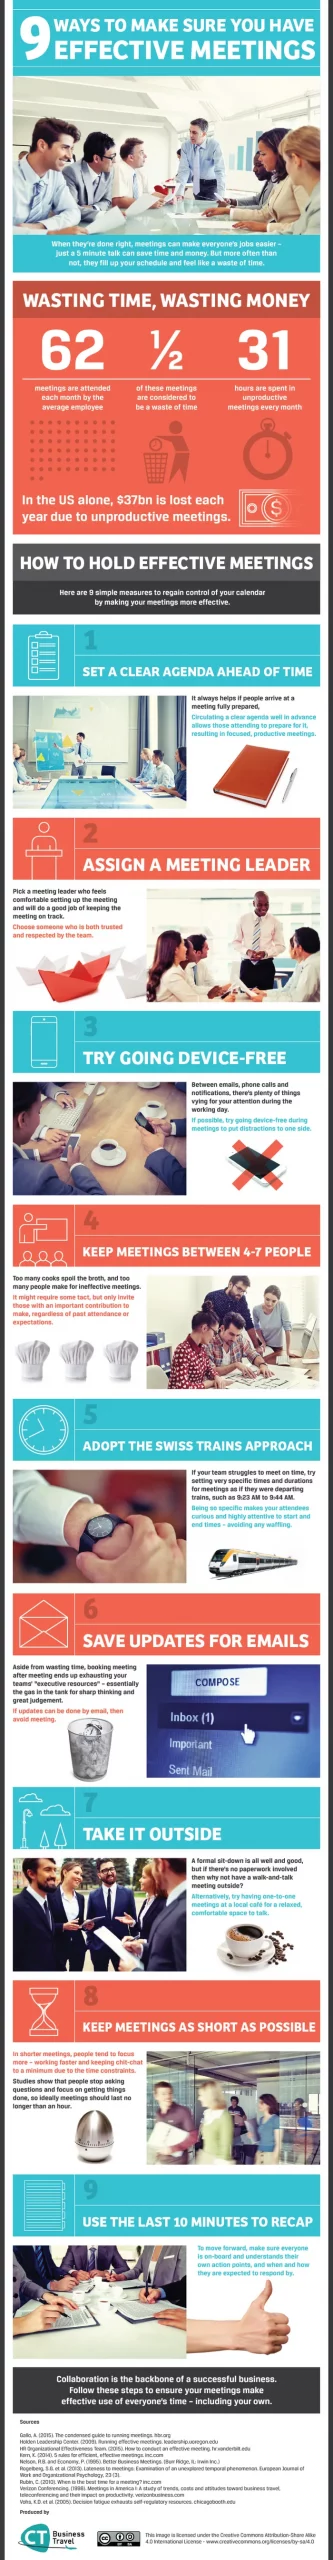 How to hold effective meetings: Infographic